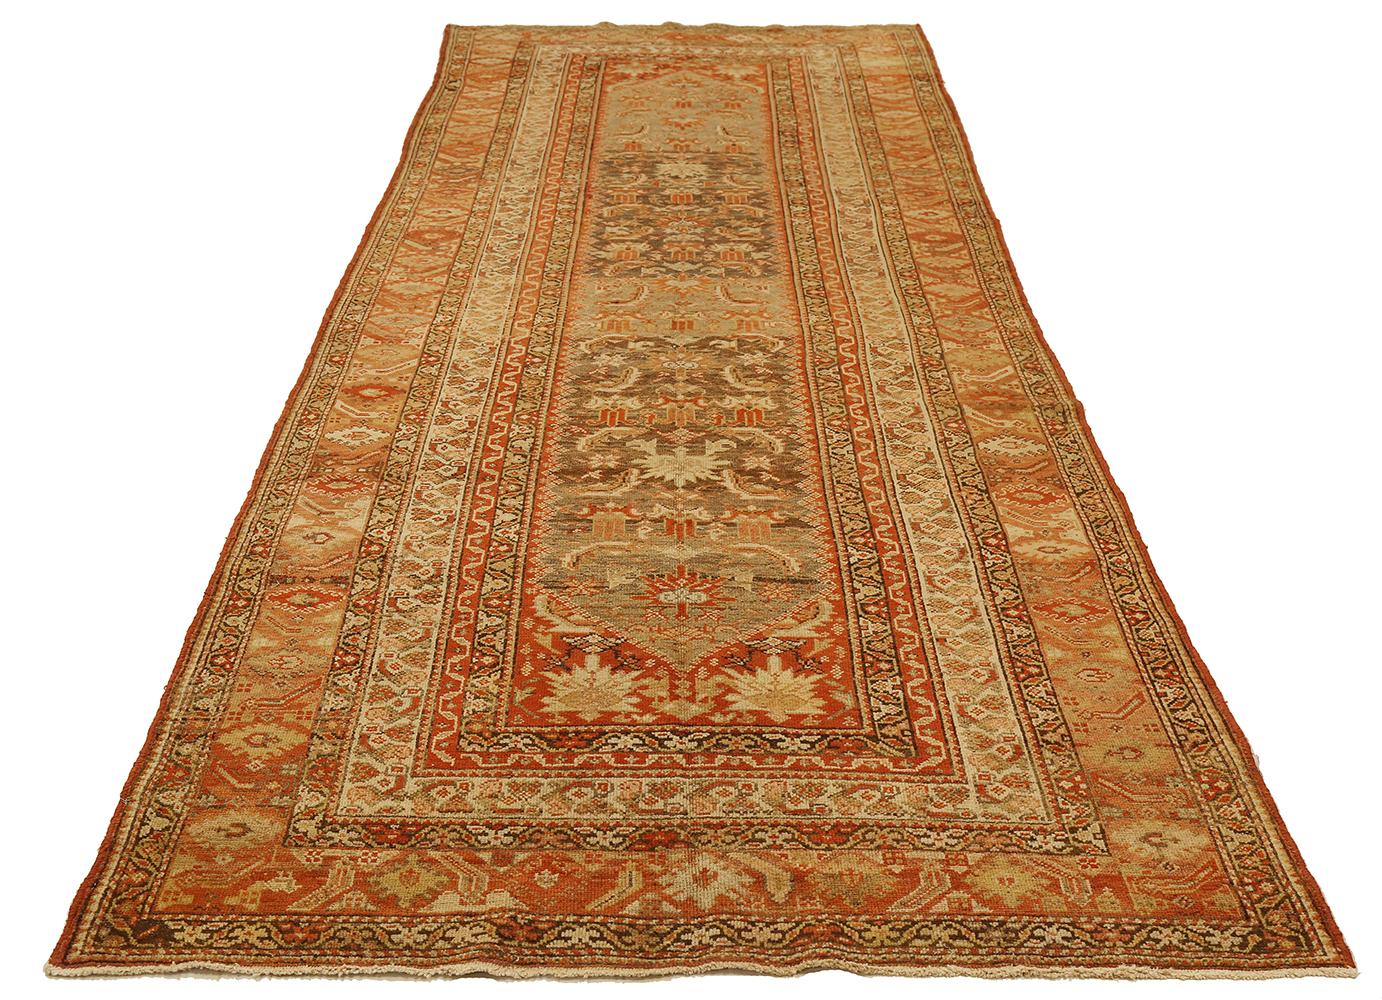 Antique Persian rug handwoven from the finest sheep’s wool and colored with all-natural vegetable dyes that are safe for humans and pets. It’s a traditional Malayer design featuring ivory and brown floral details over a red field. It’s a lovely